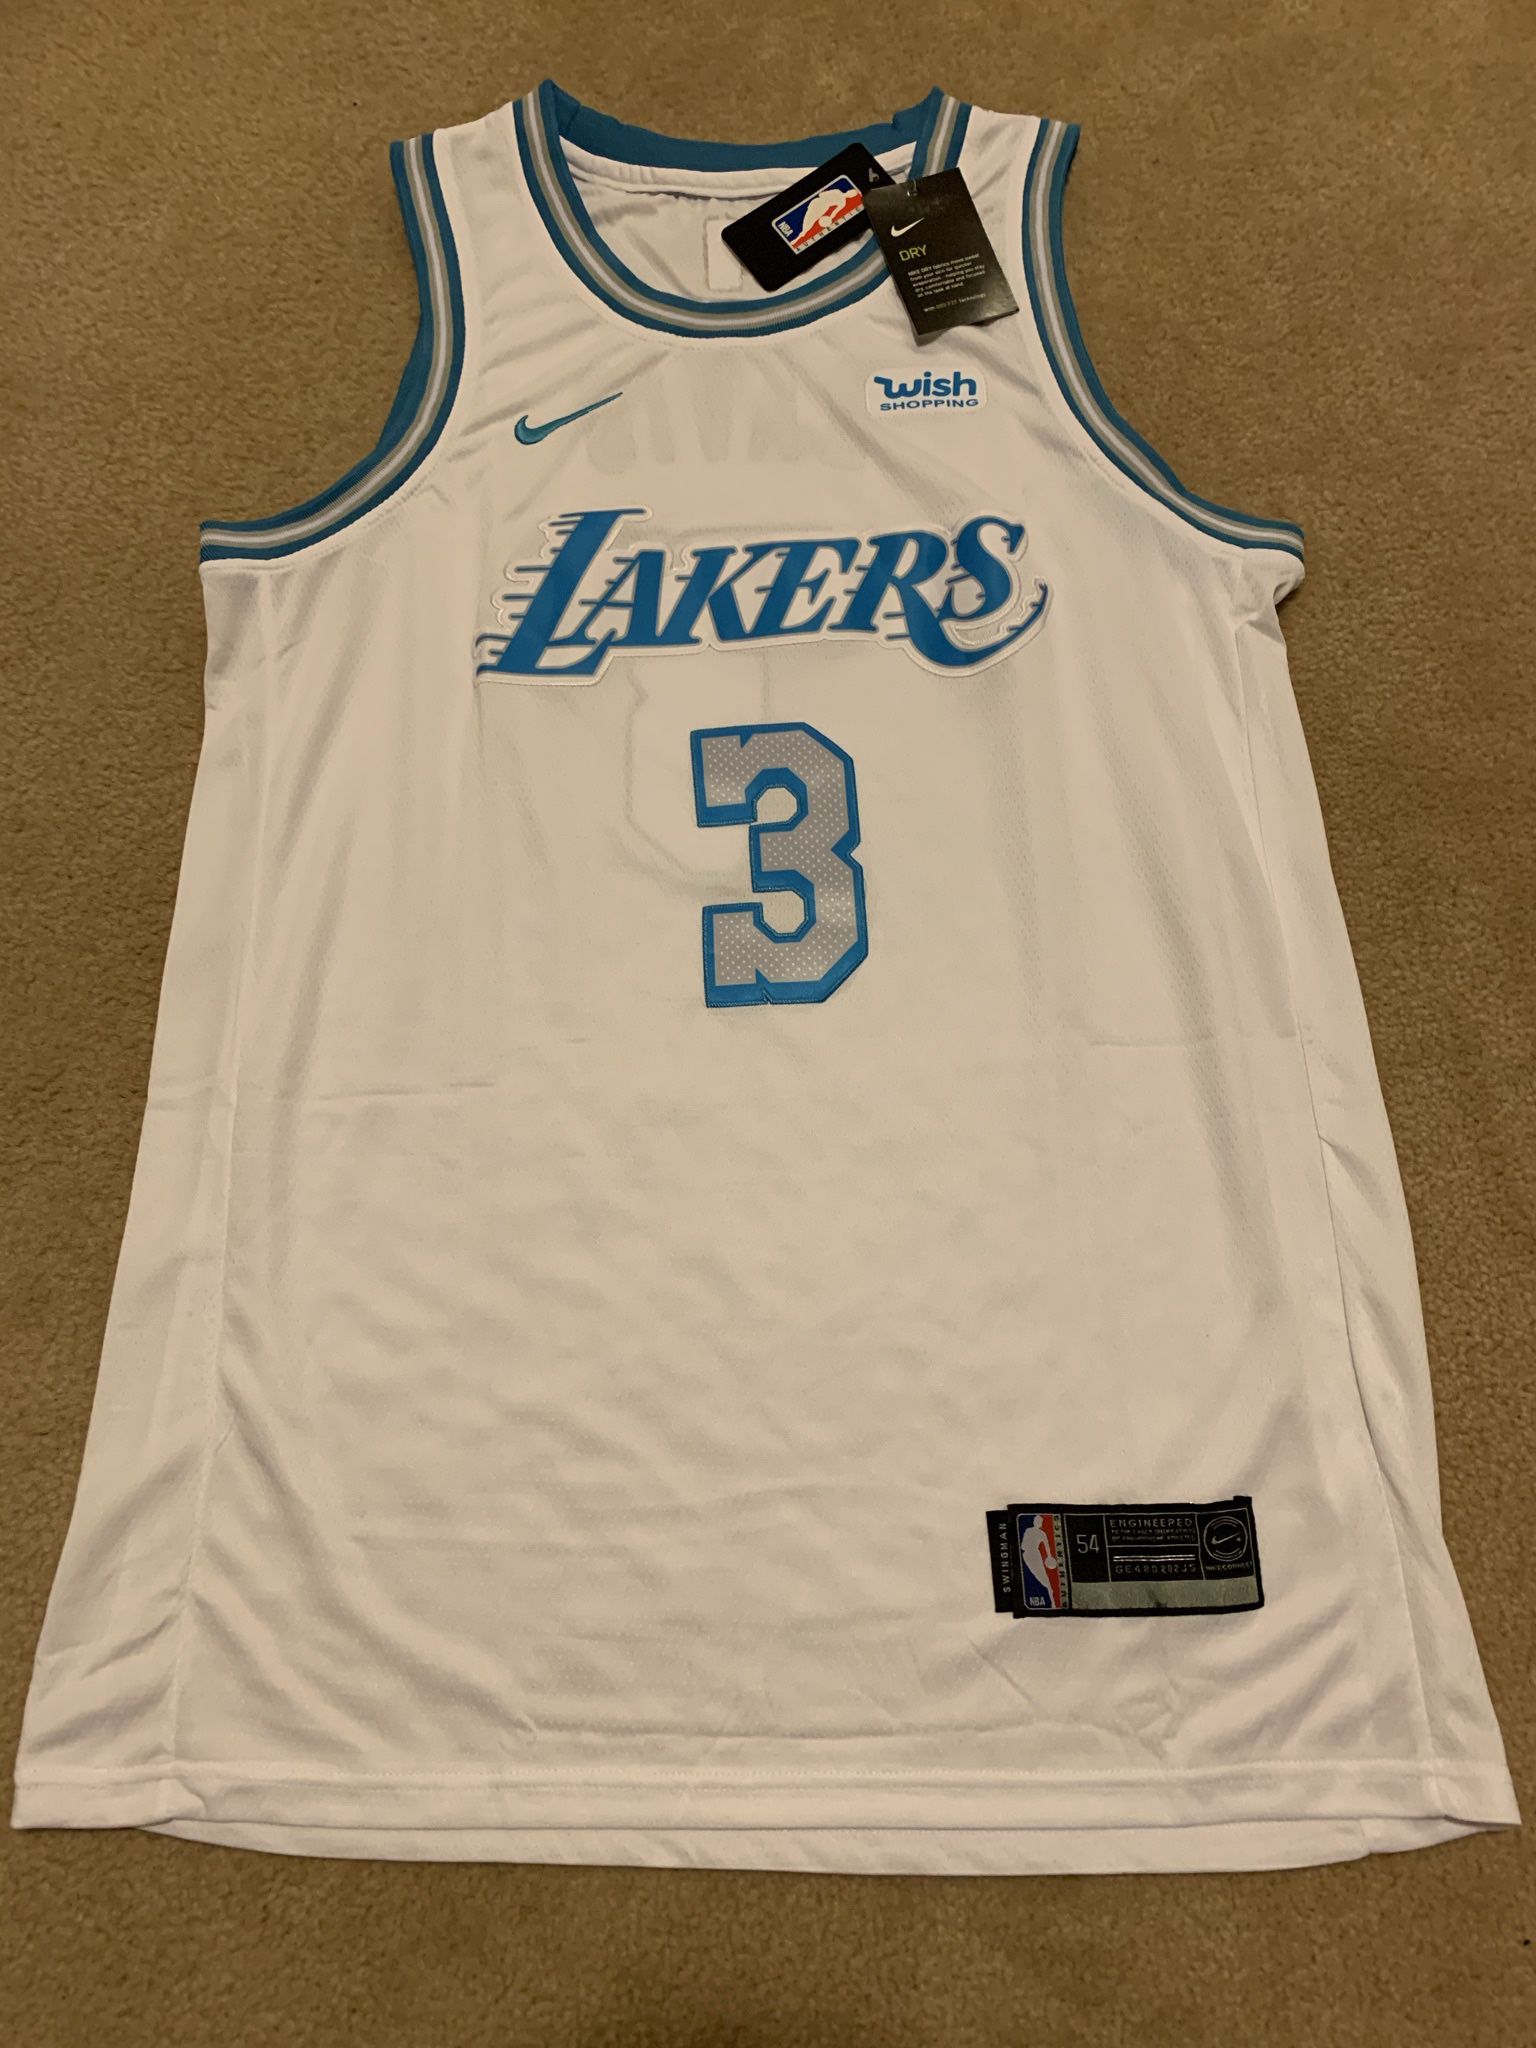 Lakers Anthony Davis Jersey for Sale in San Pedro, CA - OfferUp